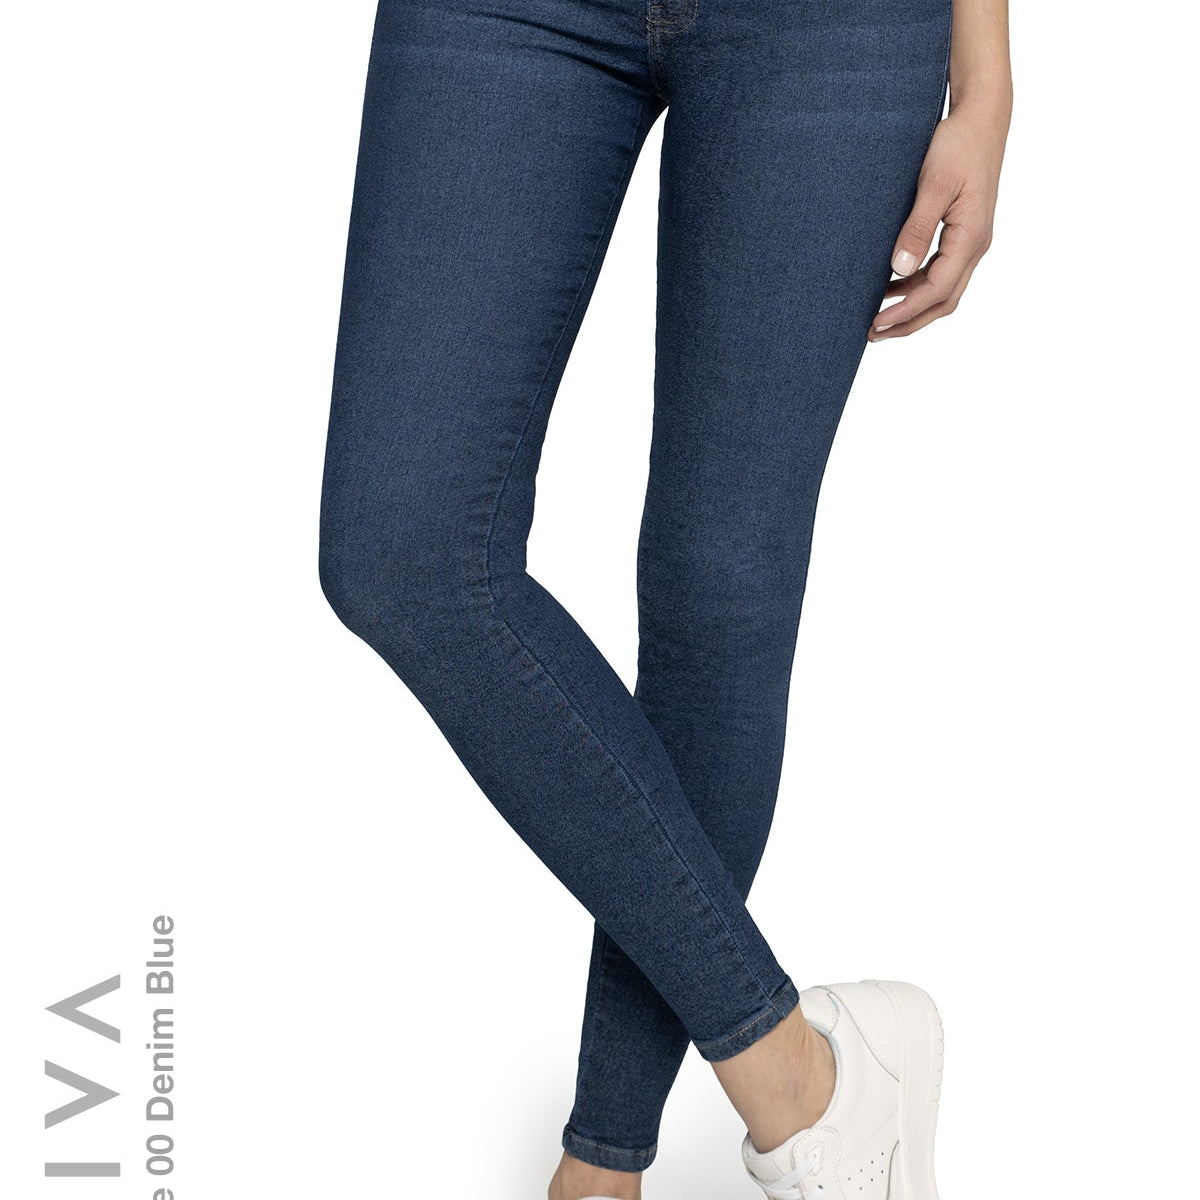 MIRACLE AURORA Extreme Shaping 00 JEANS. Mid-Waisted Capacity, NATIVA, Motion, STRETCH Super Skinny BLUE, DENIM Jeans High